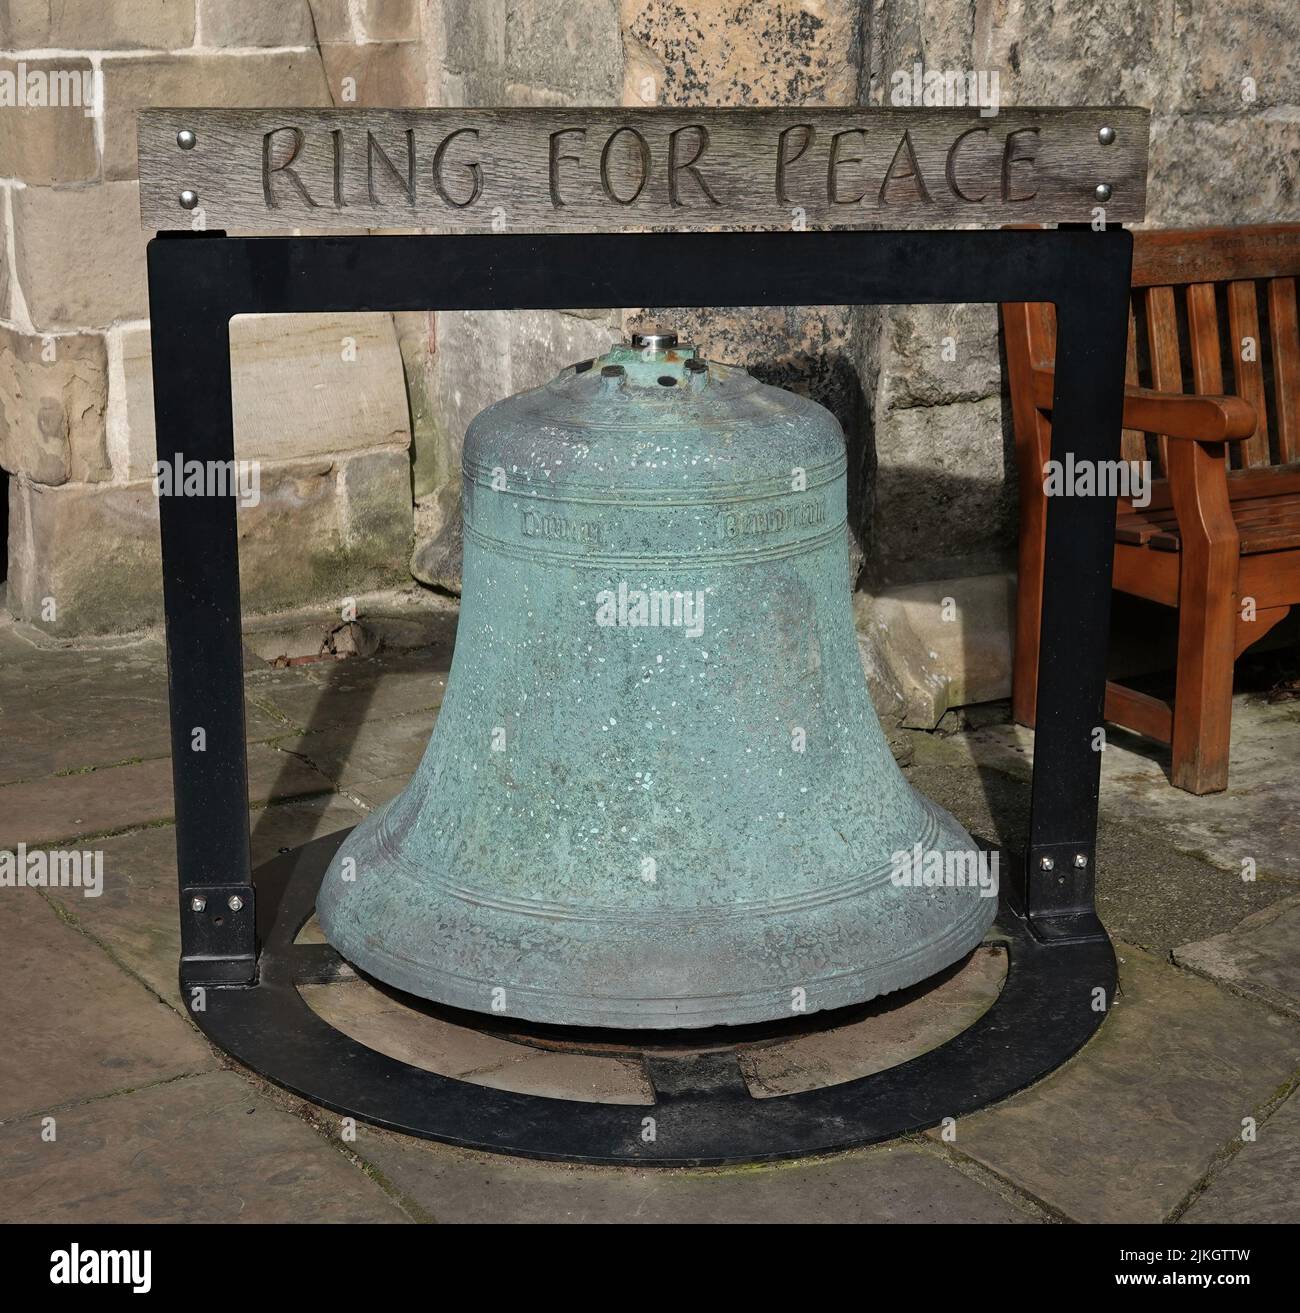 A medieval bell with the inscription Ring For Peace outside the Holy Trinity Church in York, UK Stock Photo